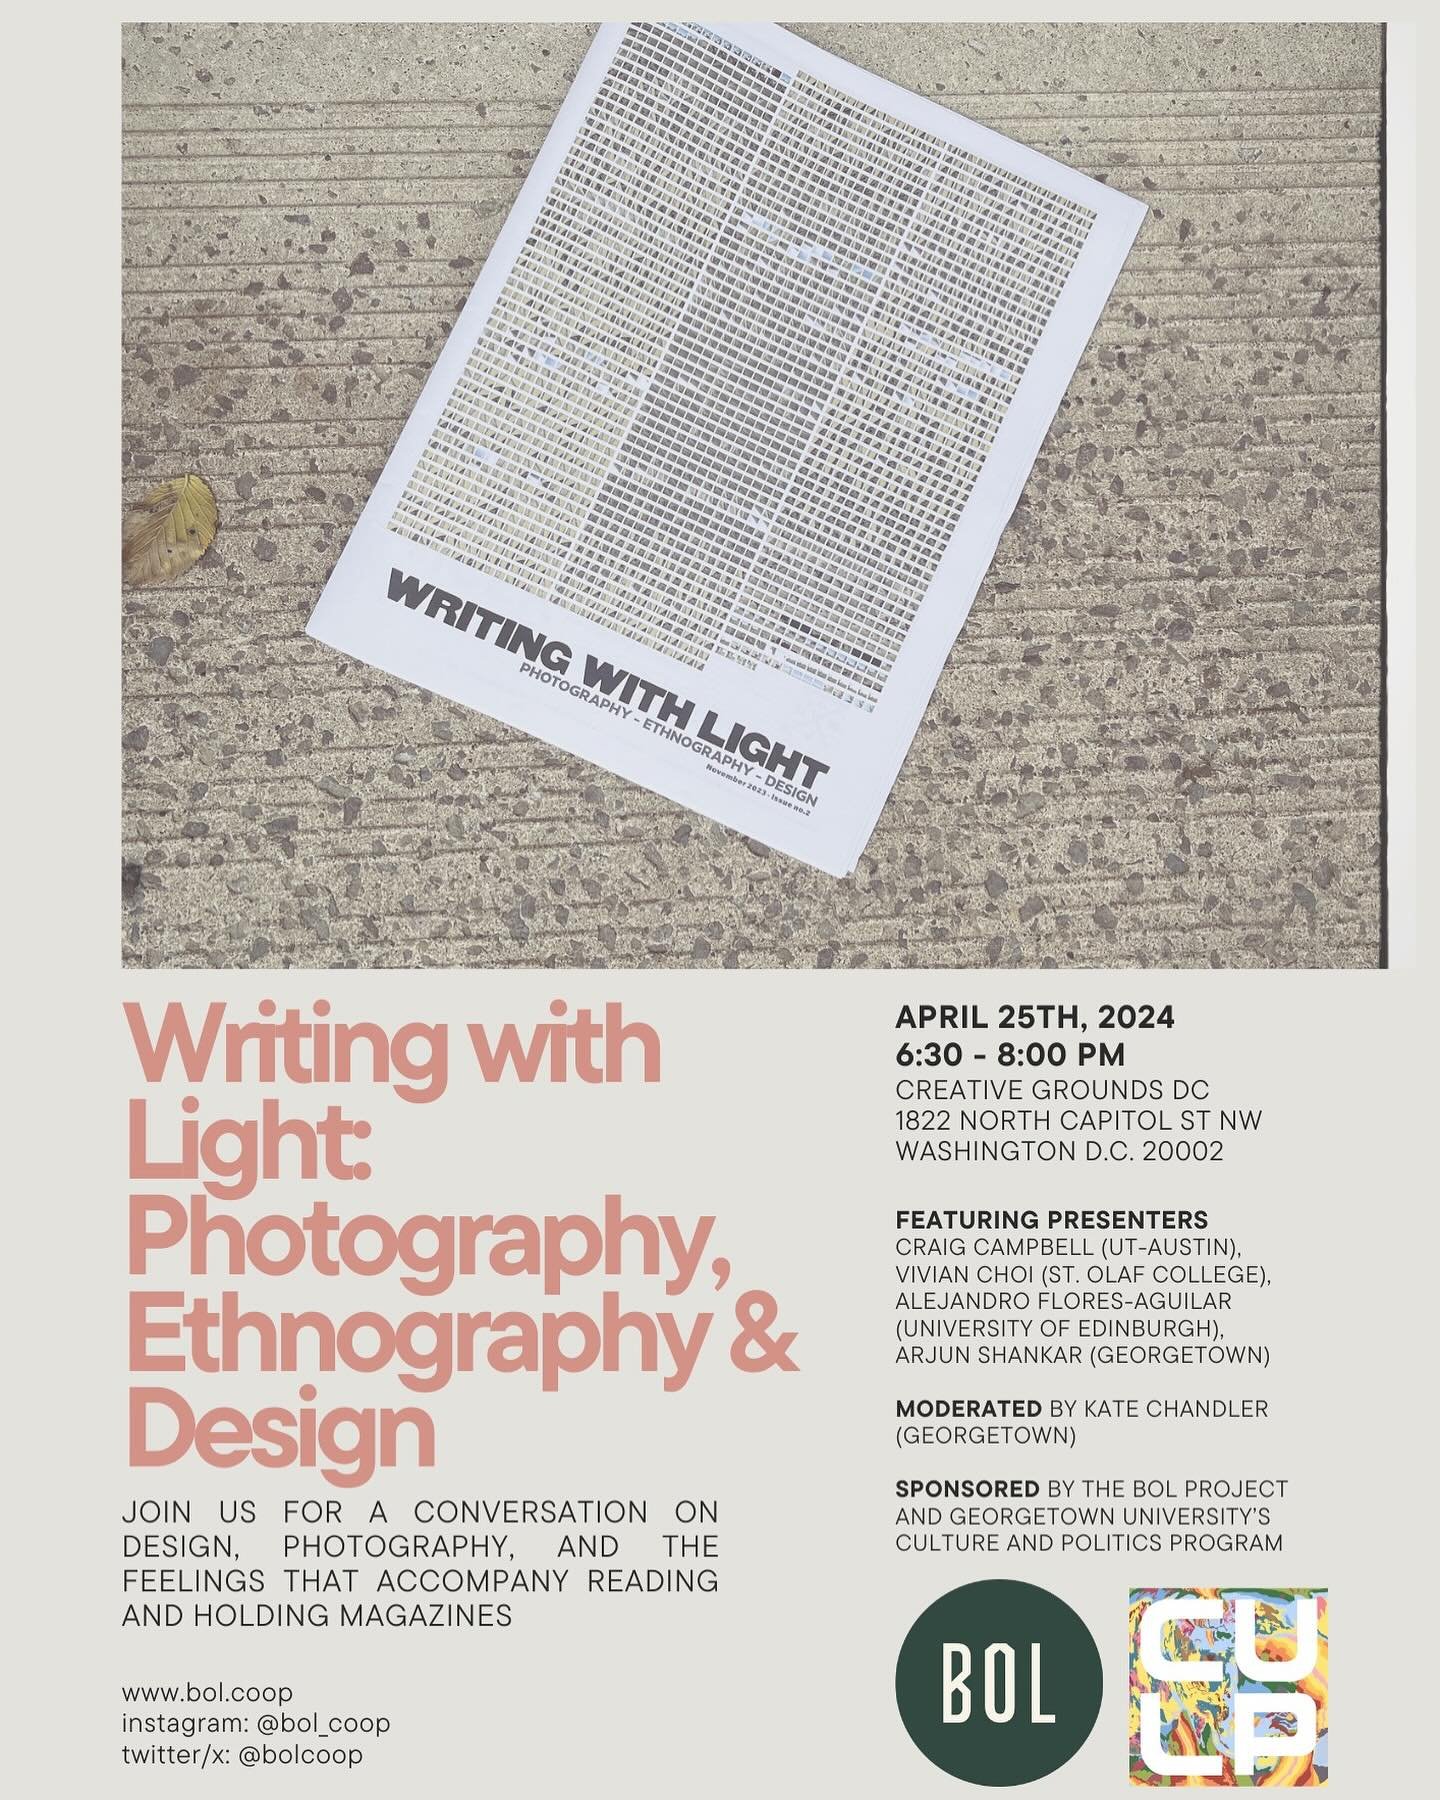 Join us for a conversation on design, photography, and the feelings that accompany reading and holding magazines! 📚 April 25th from 6:30-8pm @creativegroundsdc. Event link in bio!